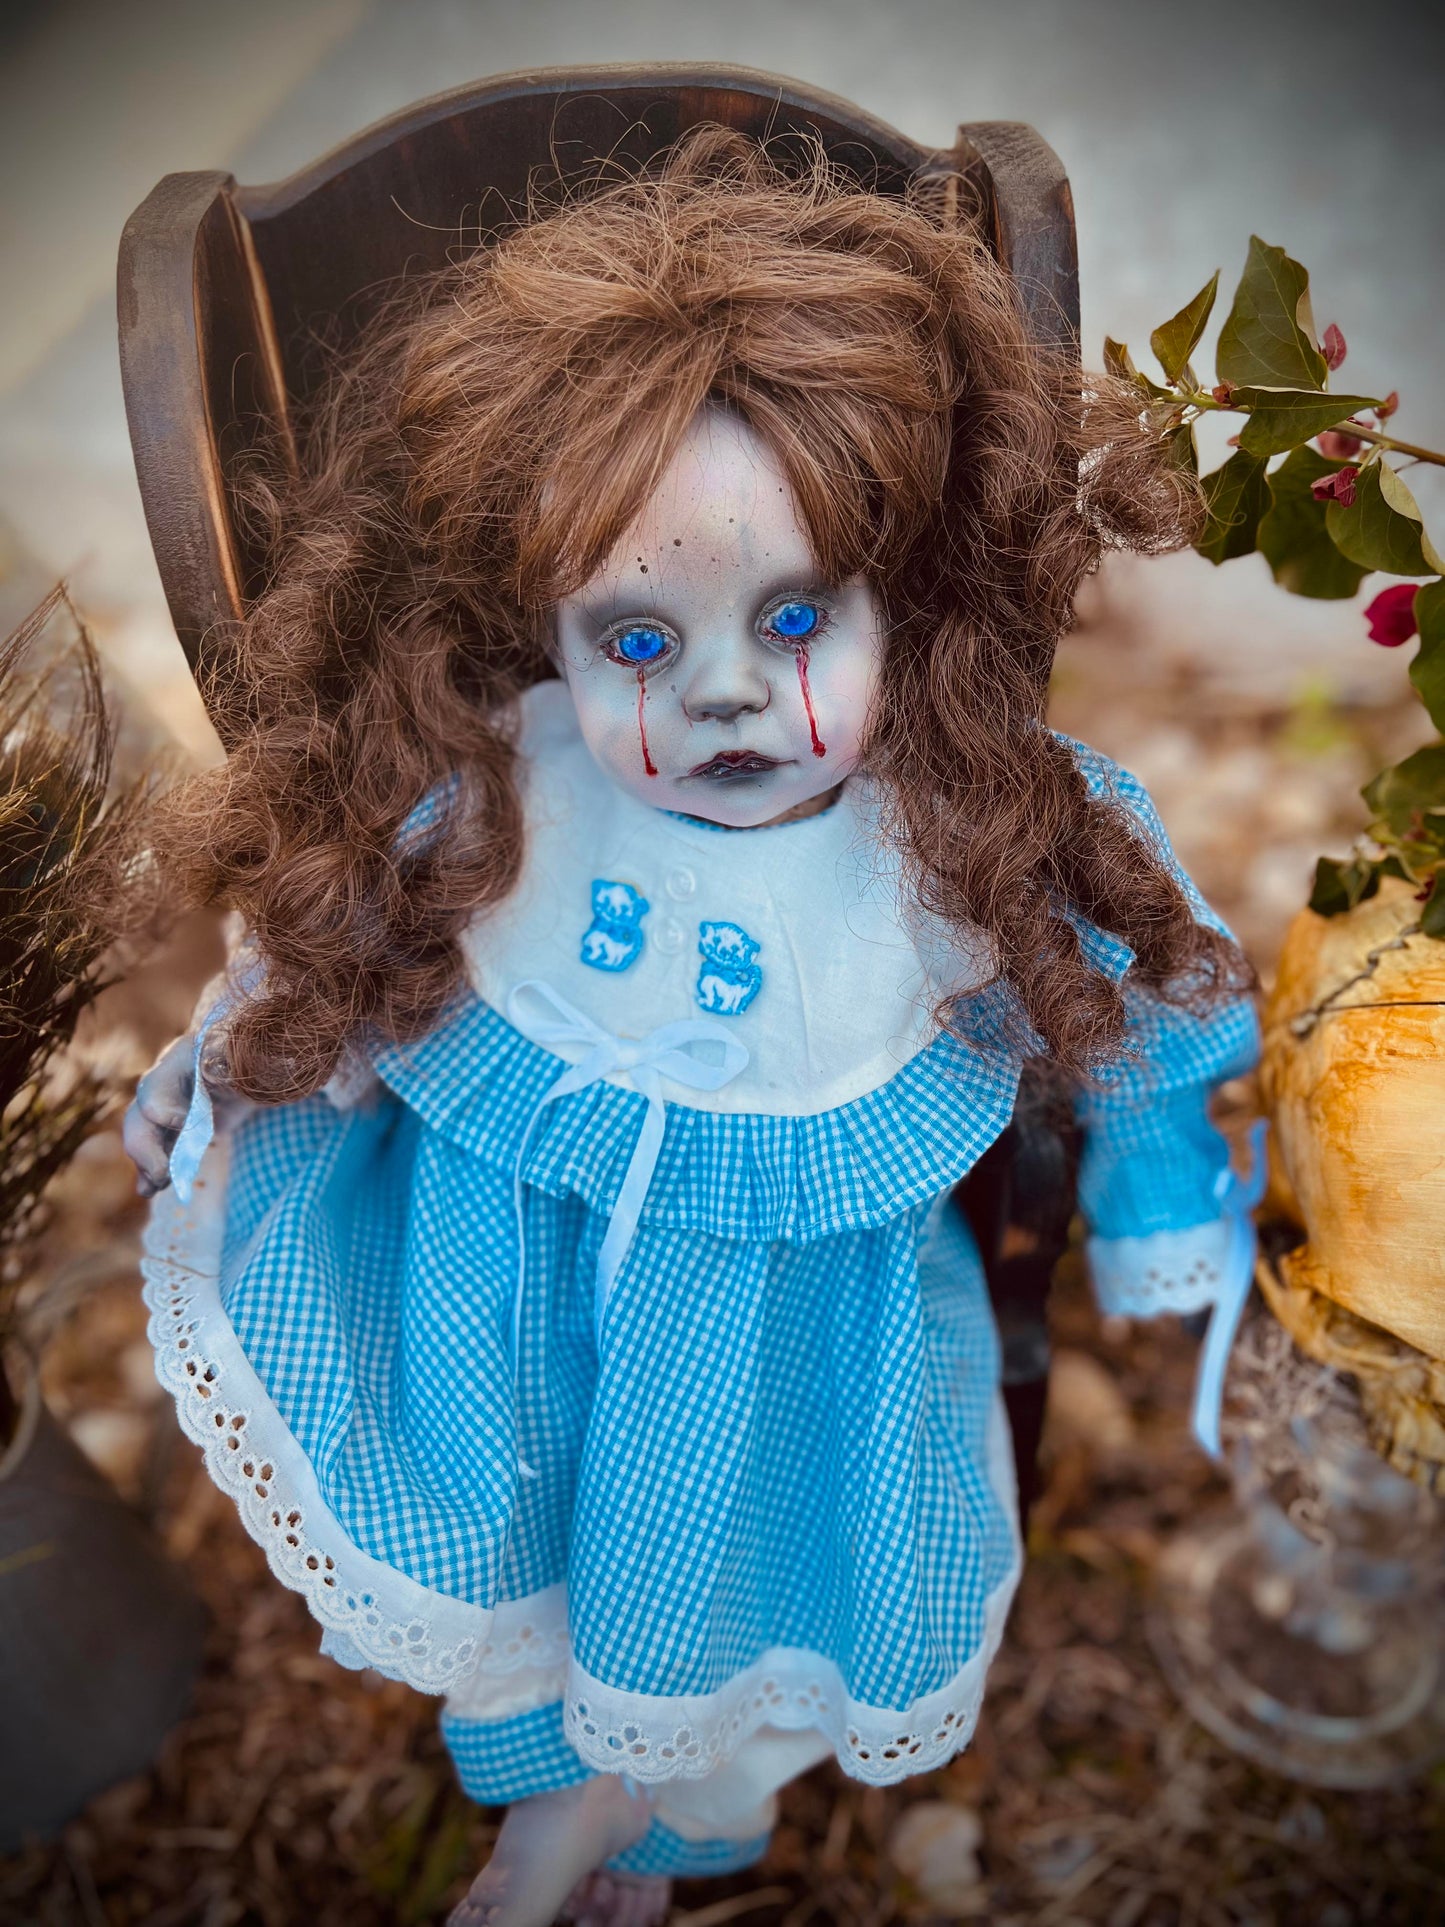 Meet Martha Jane 17" Vintage Baby Porcelain Haunted Spirt Infected Zombie Doll Scary Poltergeist Halloween Spooky Hand Painted Gift Idea